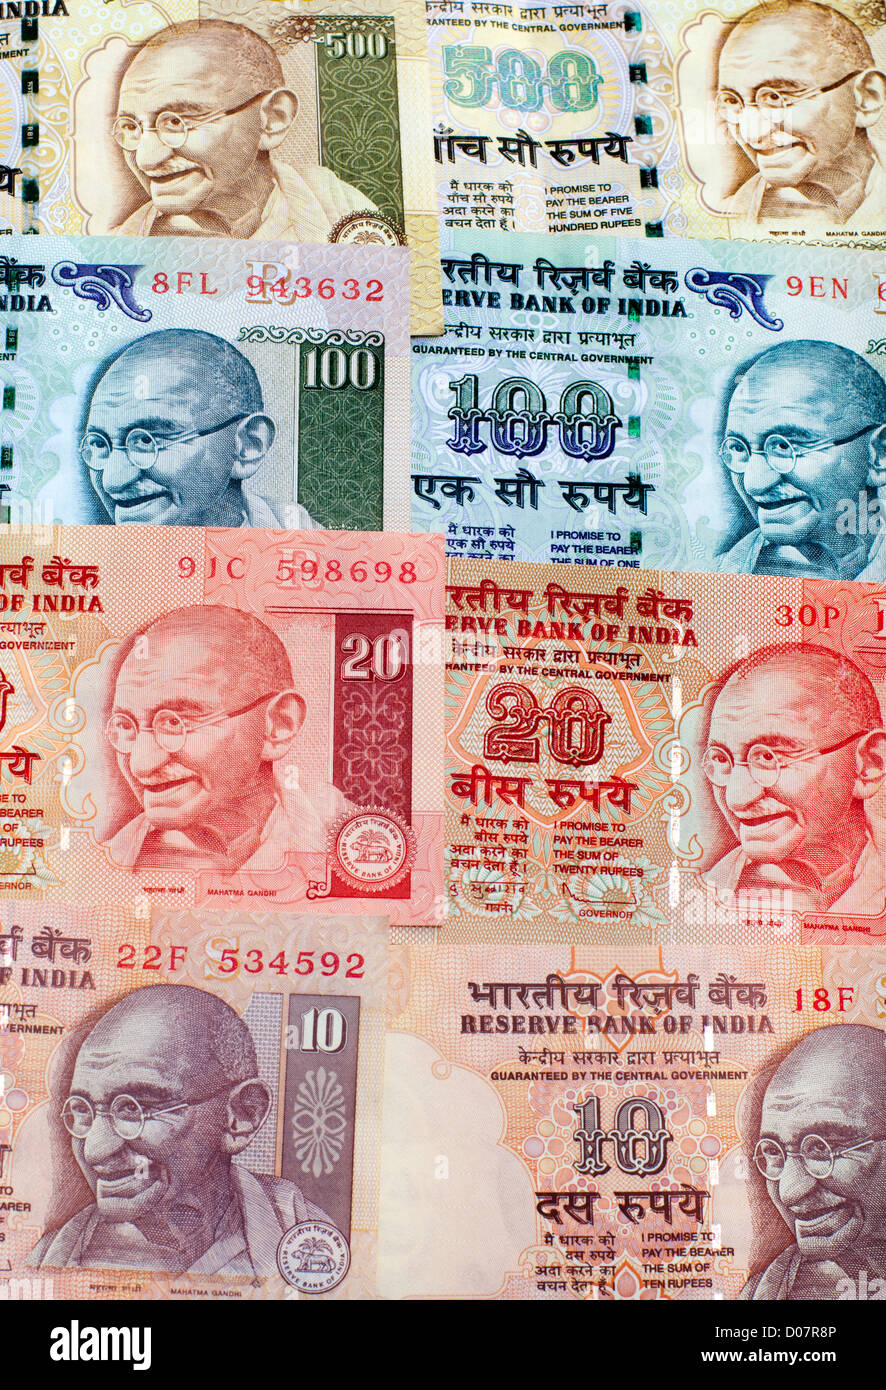 Indian Rupee bank notes background Stock Photo